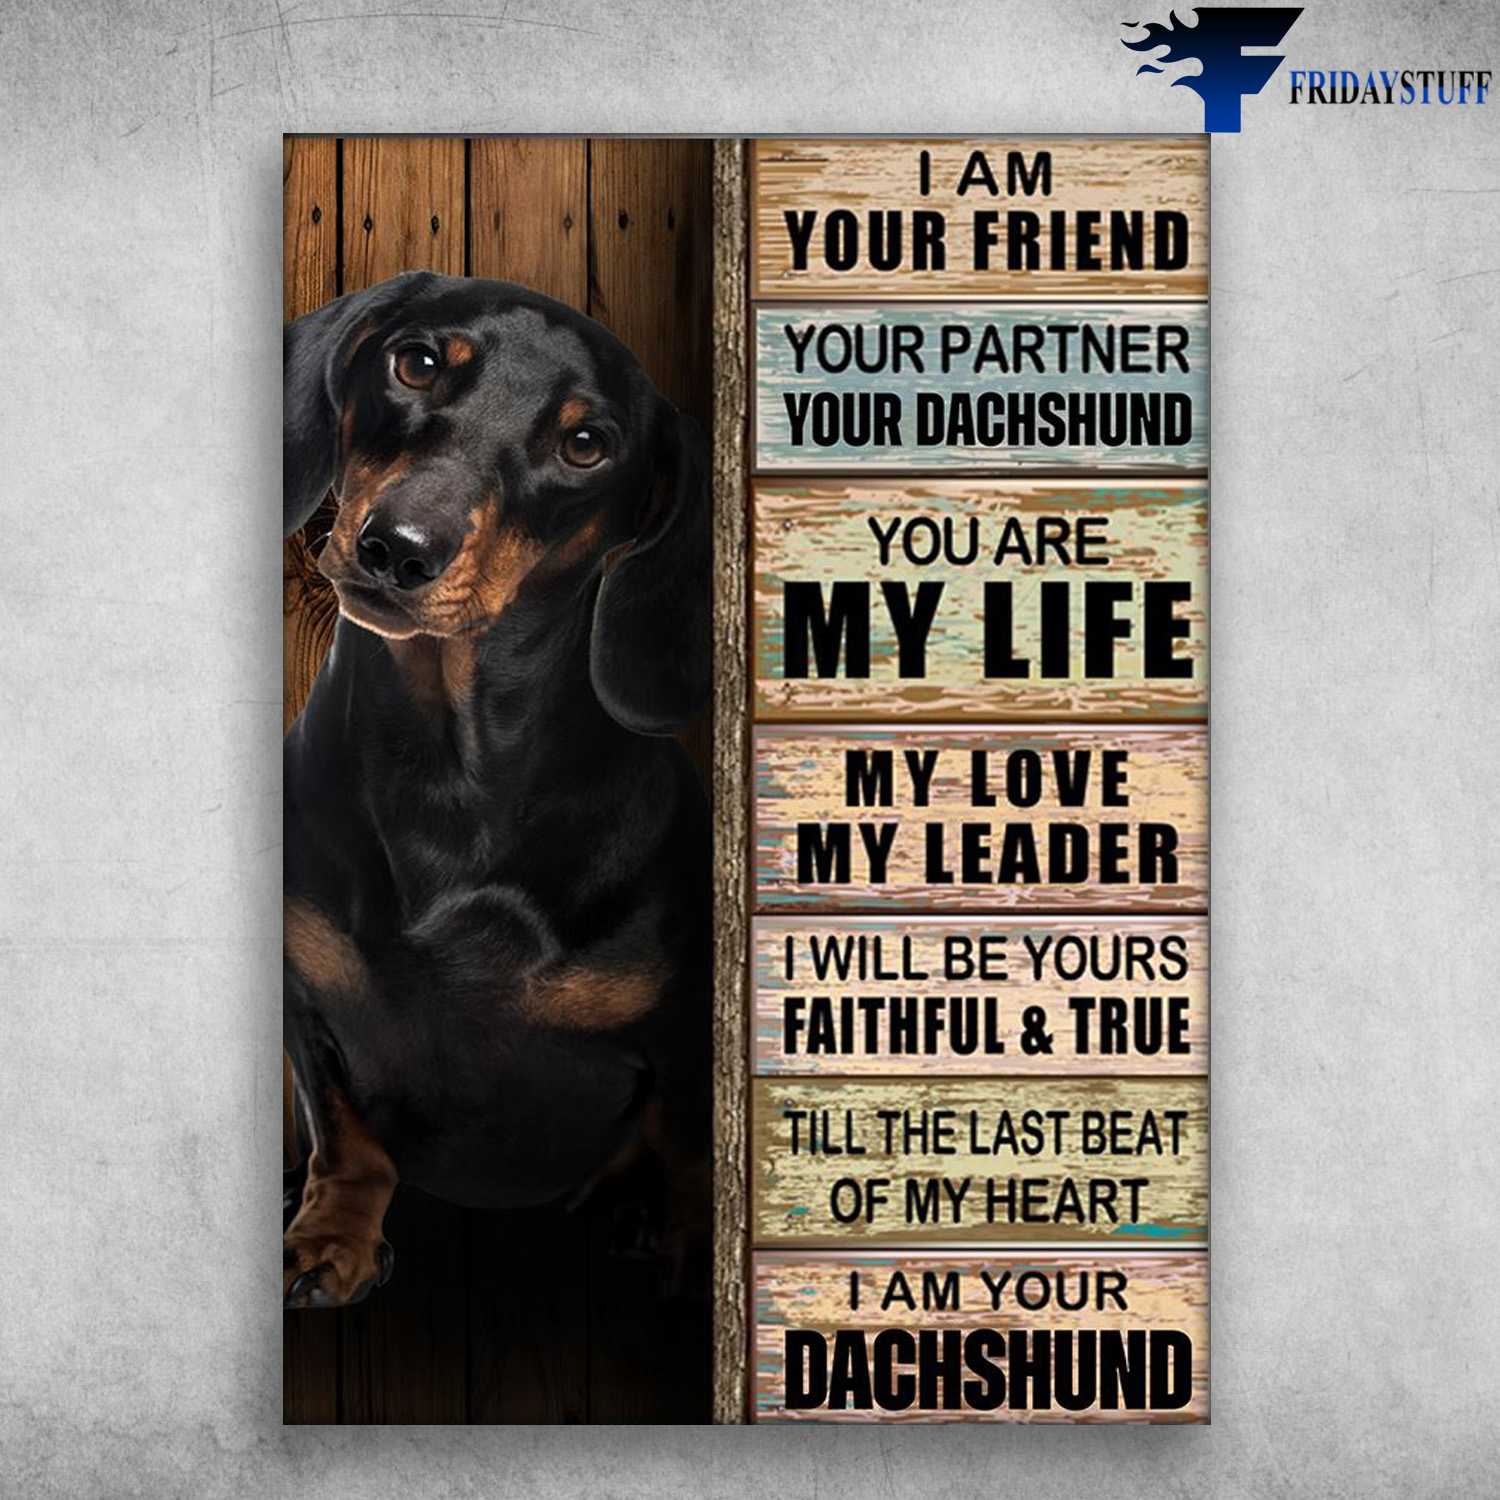 Dachshund Dog - I Am Your Friend, Your Partner, Your Dachshund, You Are My Life, My Love, My Leader, I Will Be Yours Faithful And True, Till The Lass Beat Of My Heart, I Am Your Dachshund